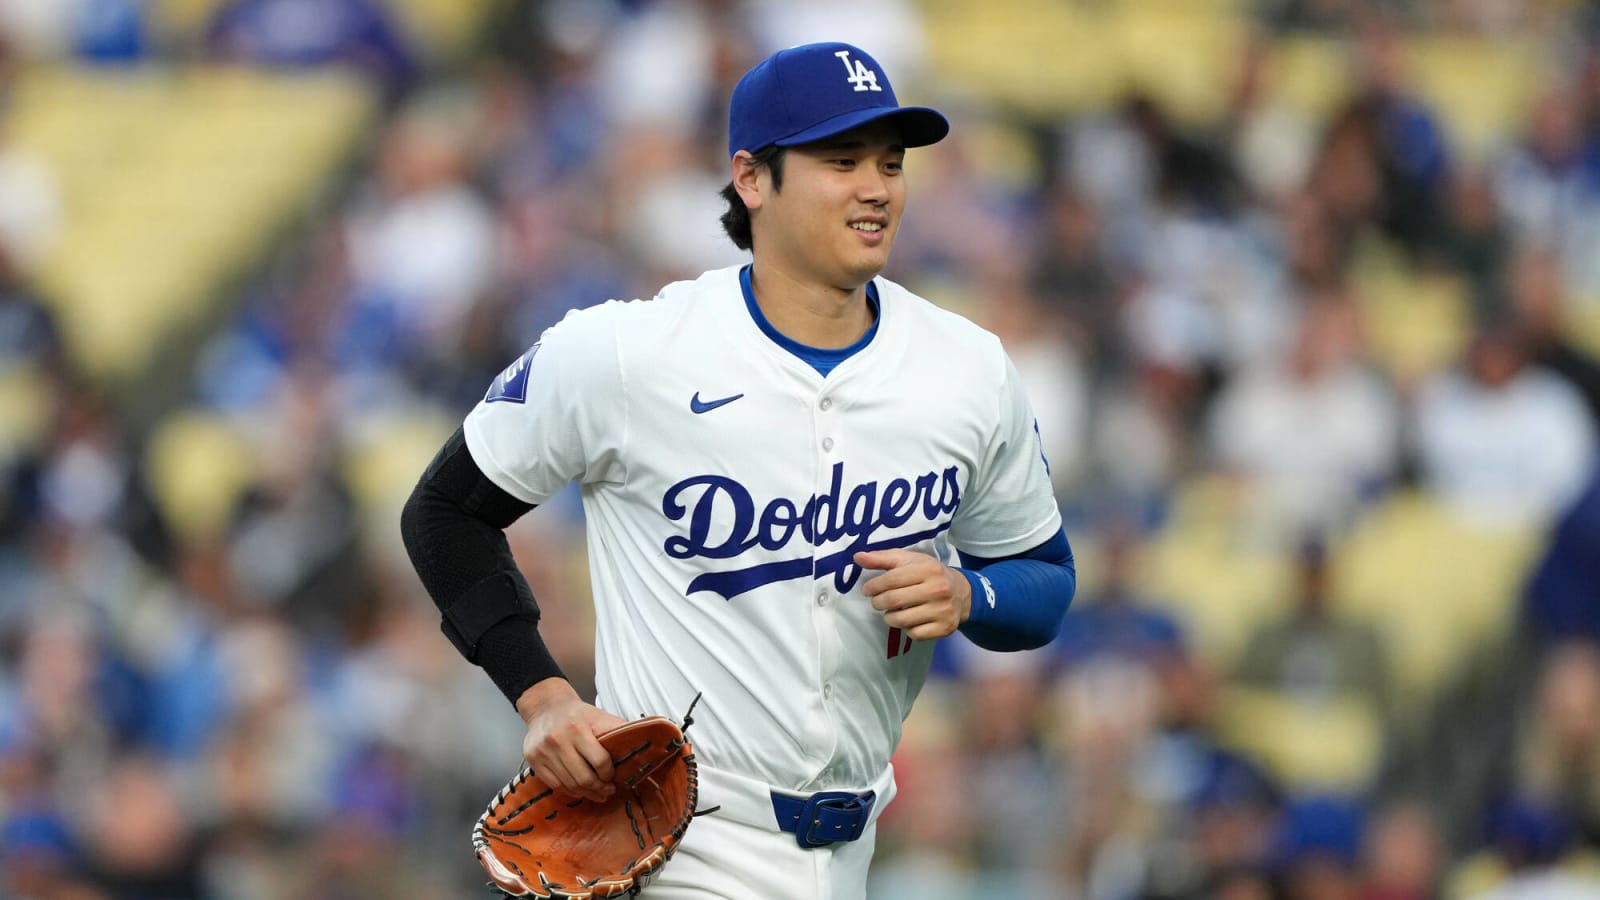  May 17 Named ‘Shohei Ohtani Day’ In Los Angeles